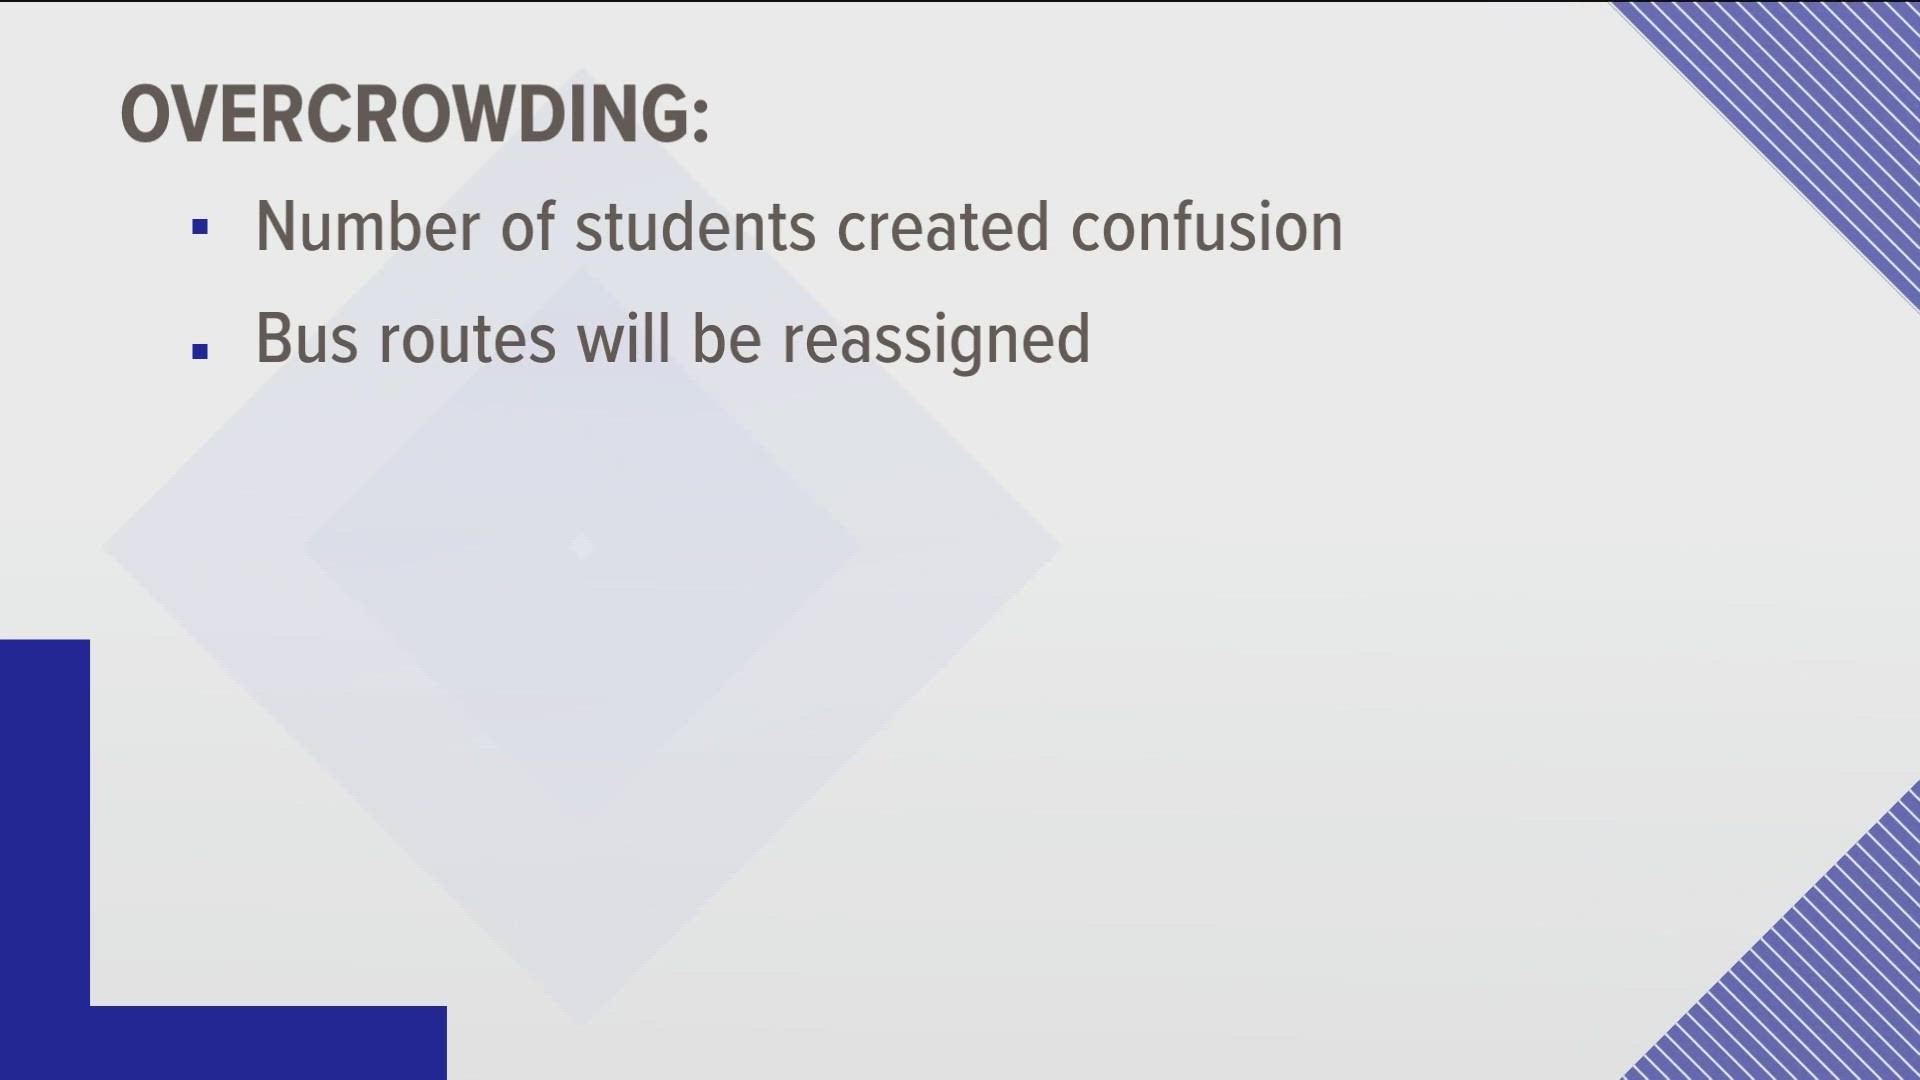 The district will introduce route changes to address bus overcrowding and said the number of students on the bus when the incident happened created confusion.